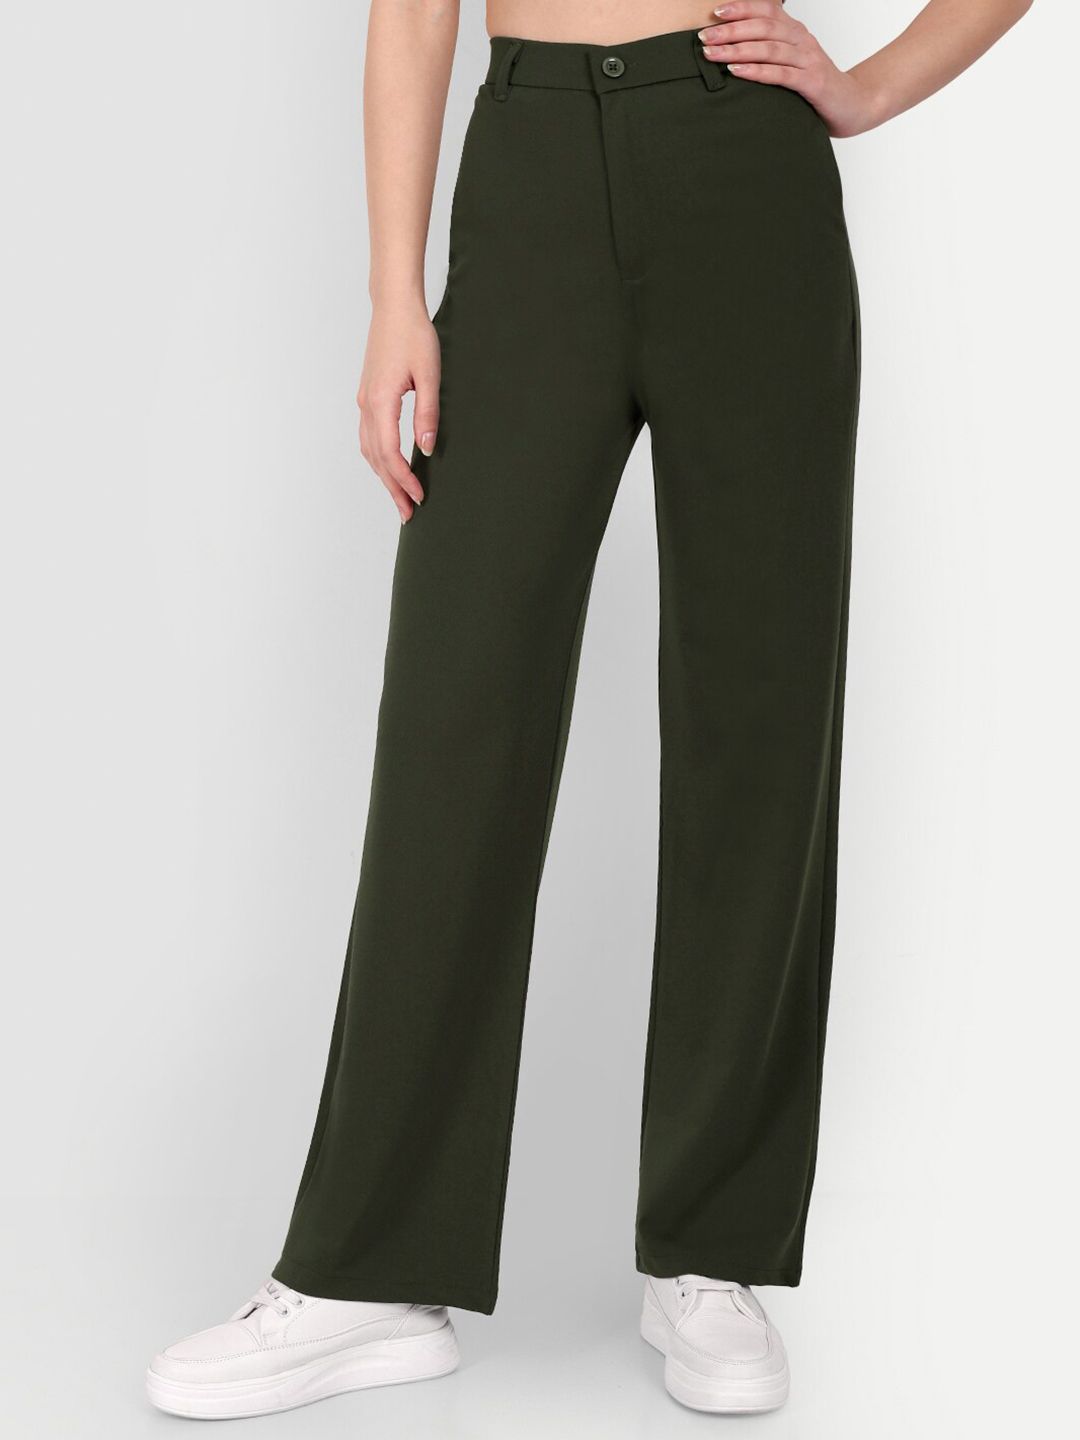 Next One Loose Fit High-Rise Easy Wash Smart Cotton Parallel Trousers Price in India